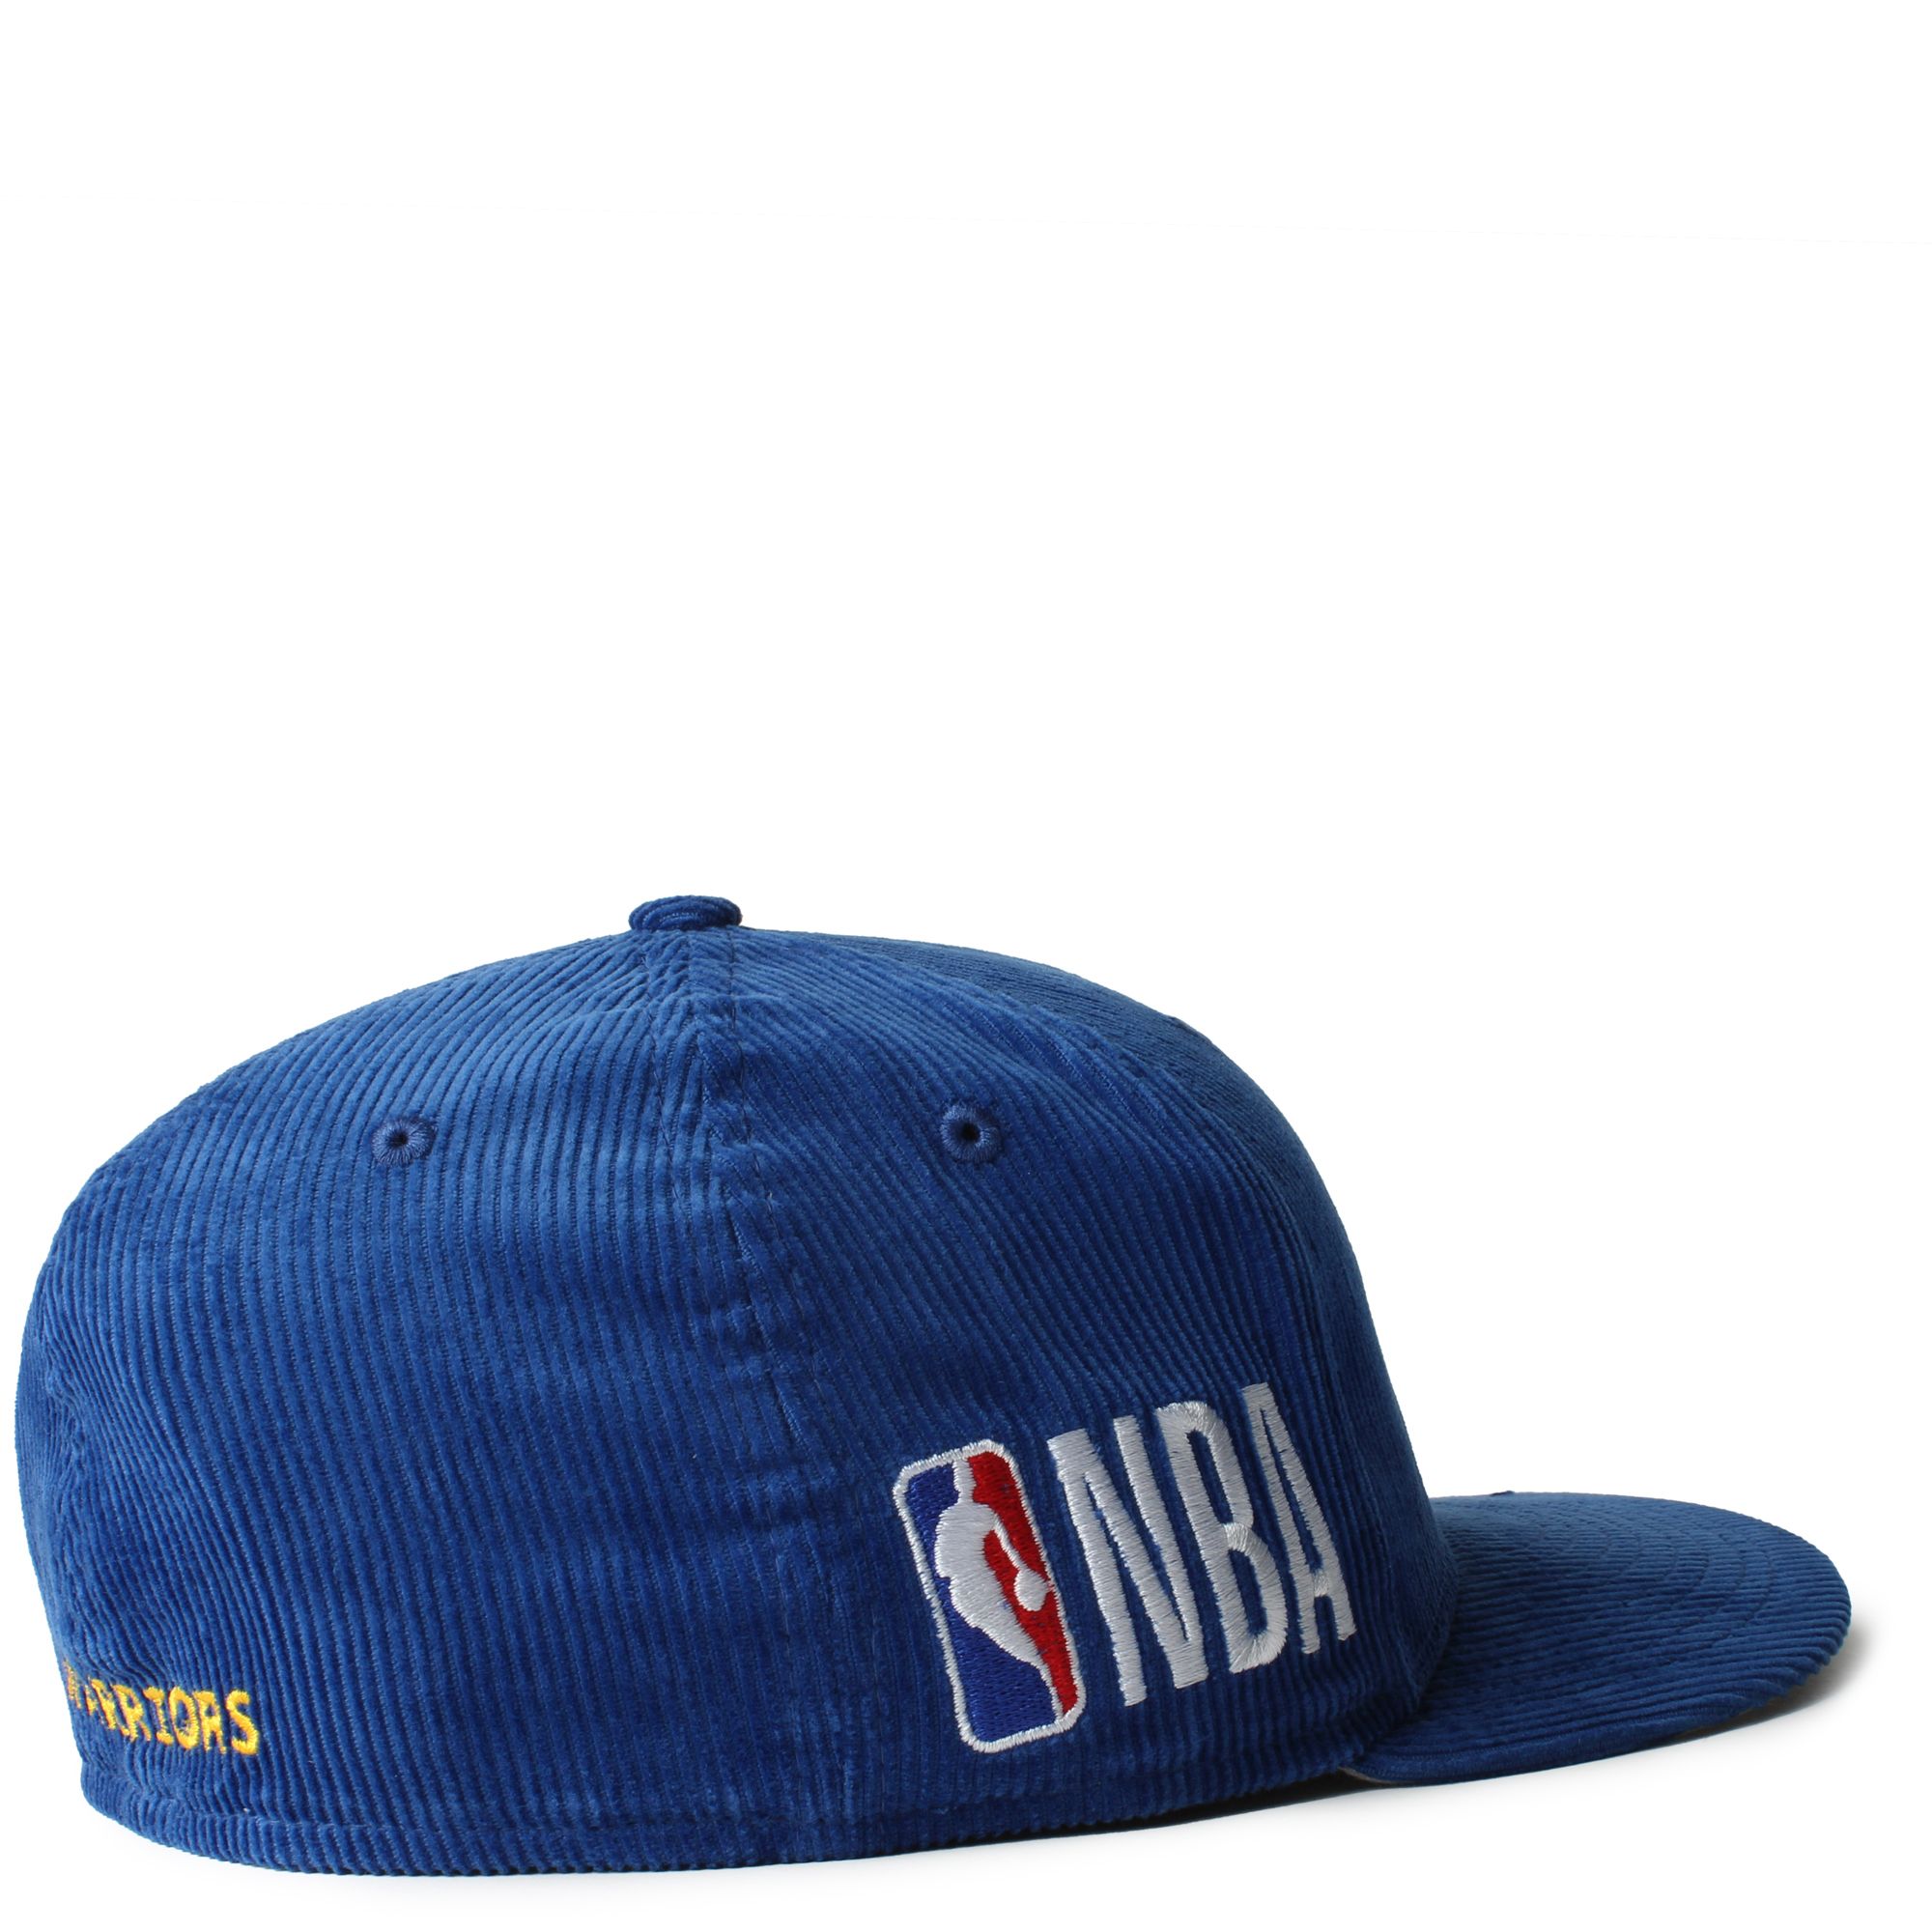 GOLDEN STATE WARRIORS THROWBACK 59FIFTY FITTED HAT 60426698